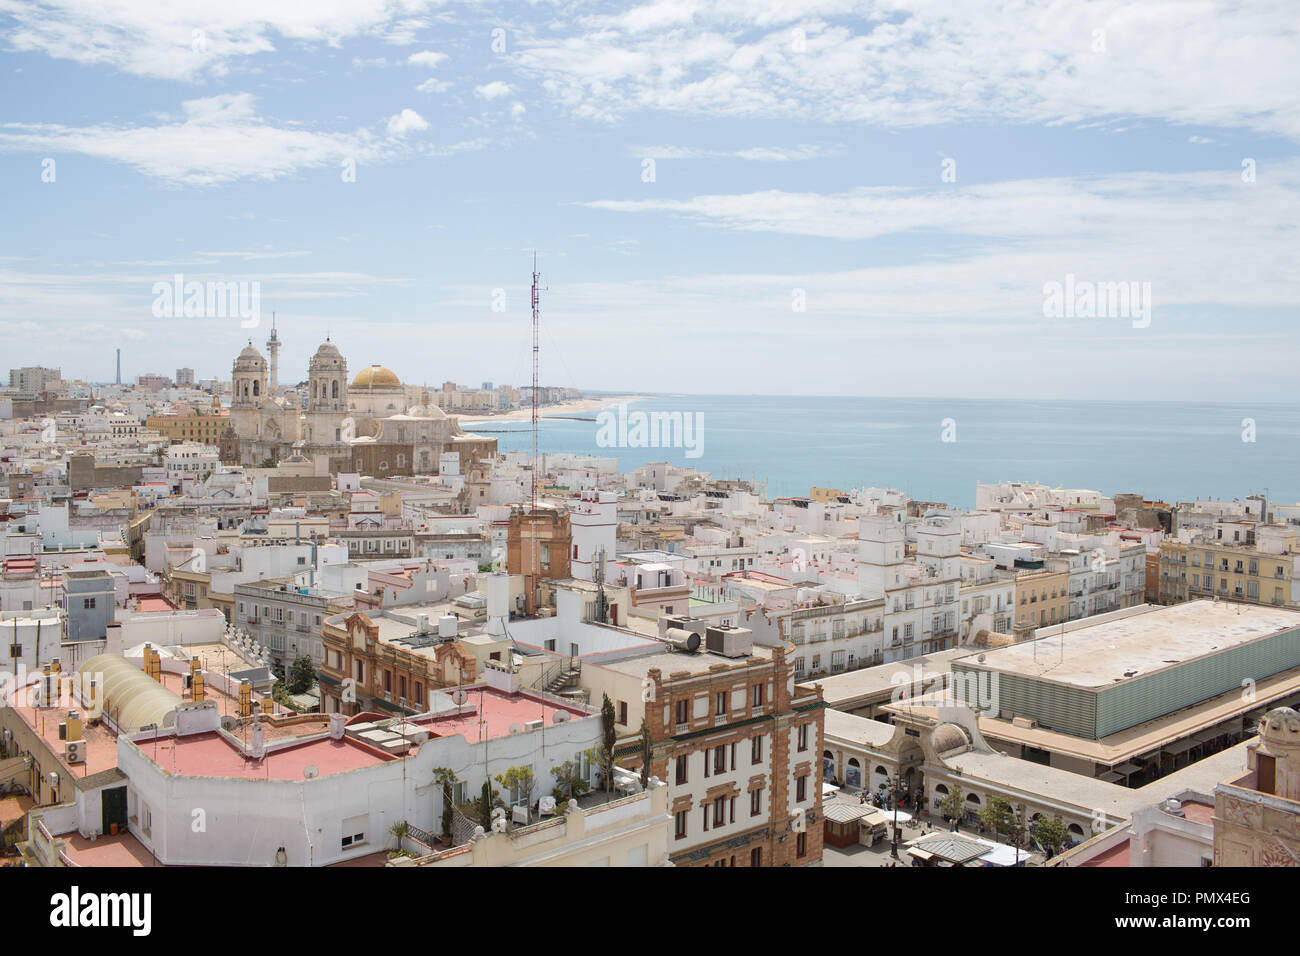 A view looking down on the rooftops of the city of Cadiz in Spain from the Tavira Tower (camera obscura) with the coastline and sea in the distance Stock Photo